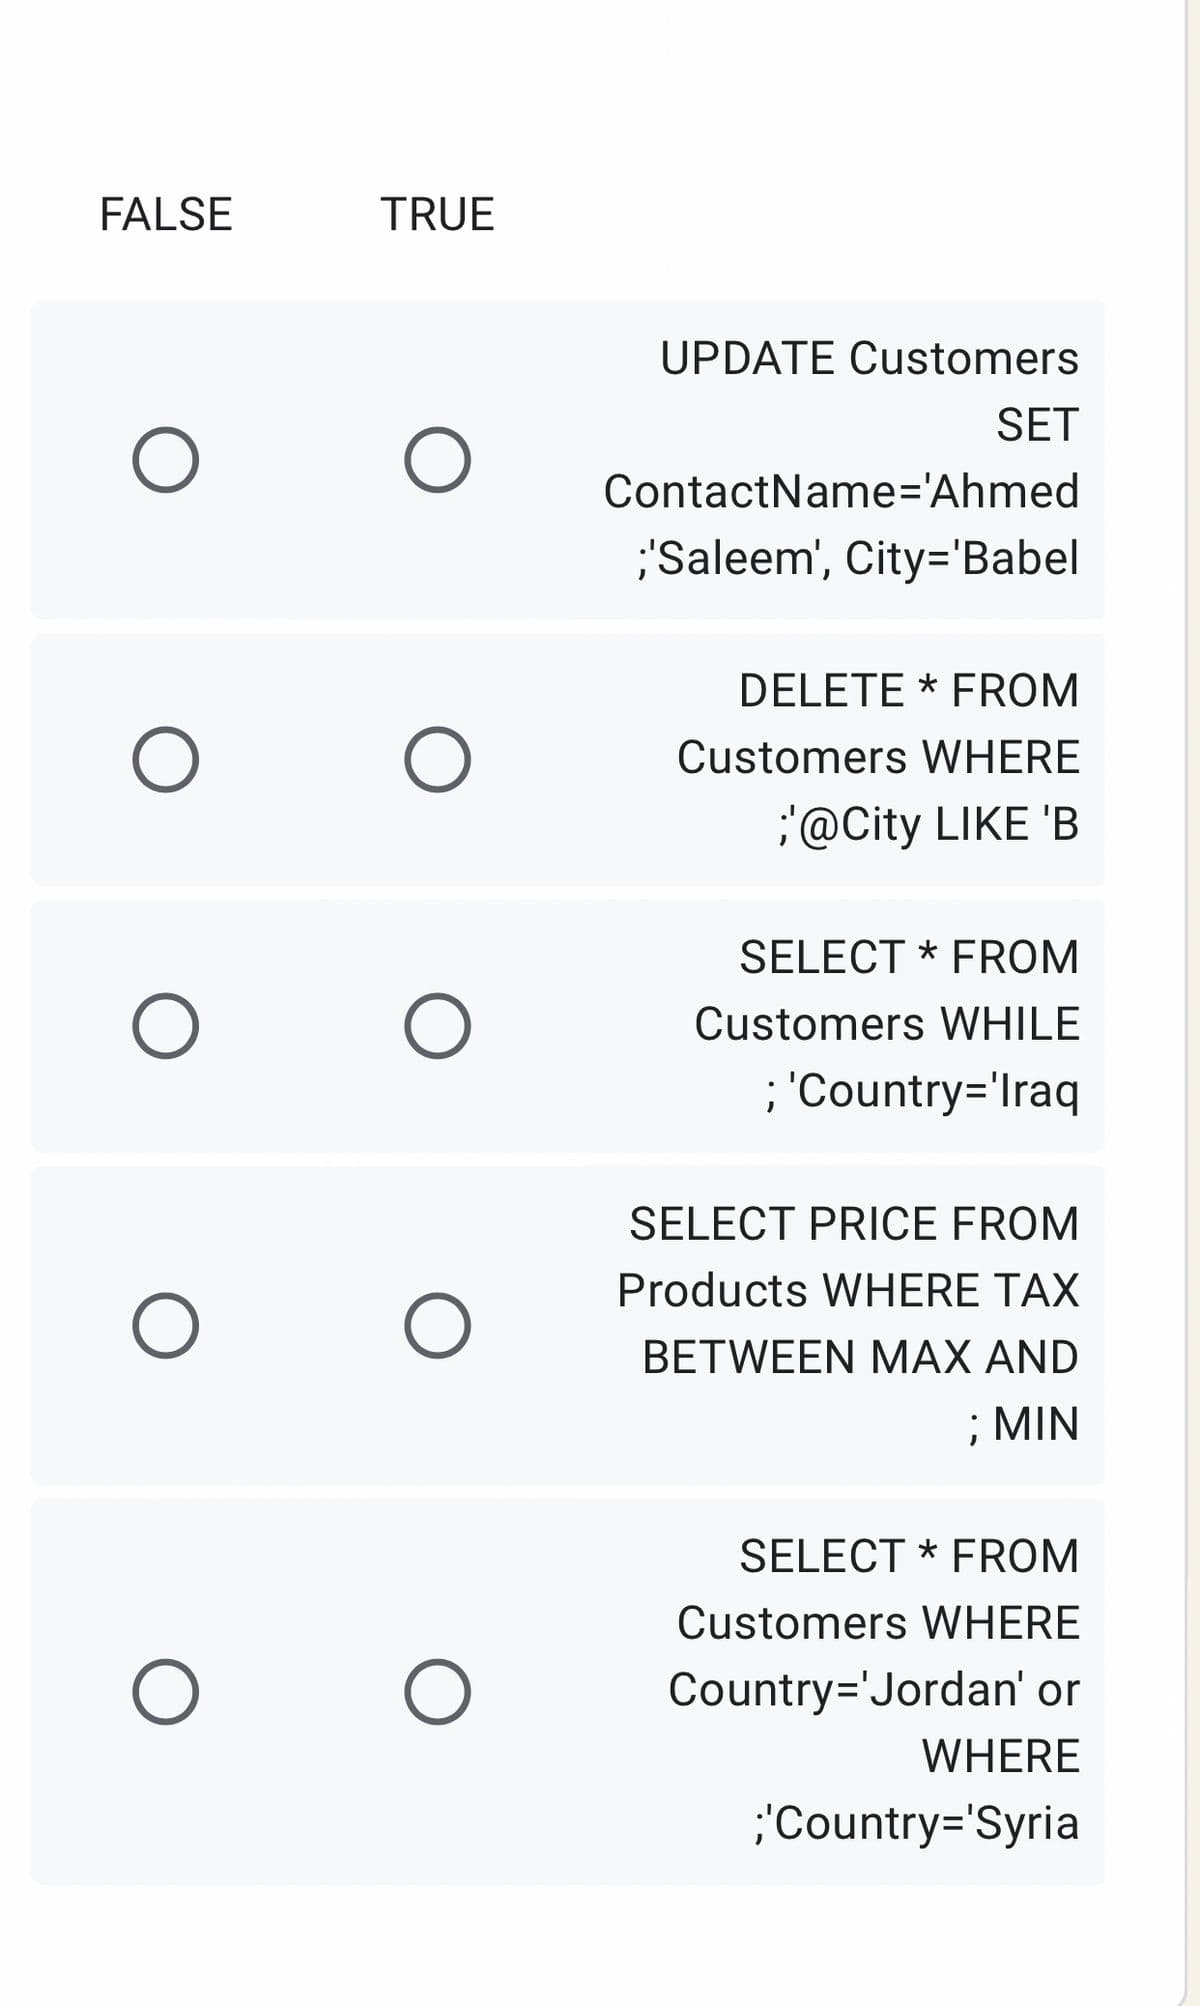 FALSE
TRUE
UPDATE Customers
SET
ContactName='Ahmed
;'Saleem', City='Babel
DELETE * FROM
Customers WHERE
@City LIKE 'B
SELECT * FROM
Customers WHILE
; 'Country='Iraq
SELECT PRICE FROM
Products WHERE TAX
ΒETWEEN ΜAX AND
; MIN
SELECT * FROM
Customers WHERE
Country='Jordan' or
WHERE
;'Country='Syria
